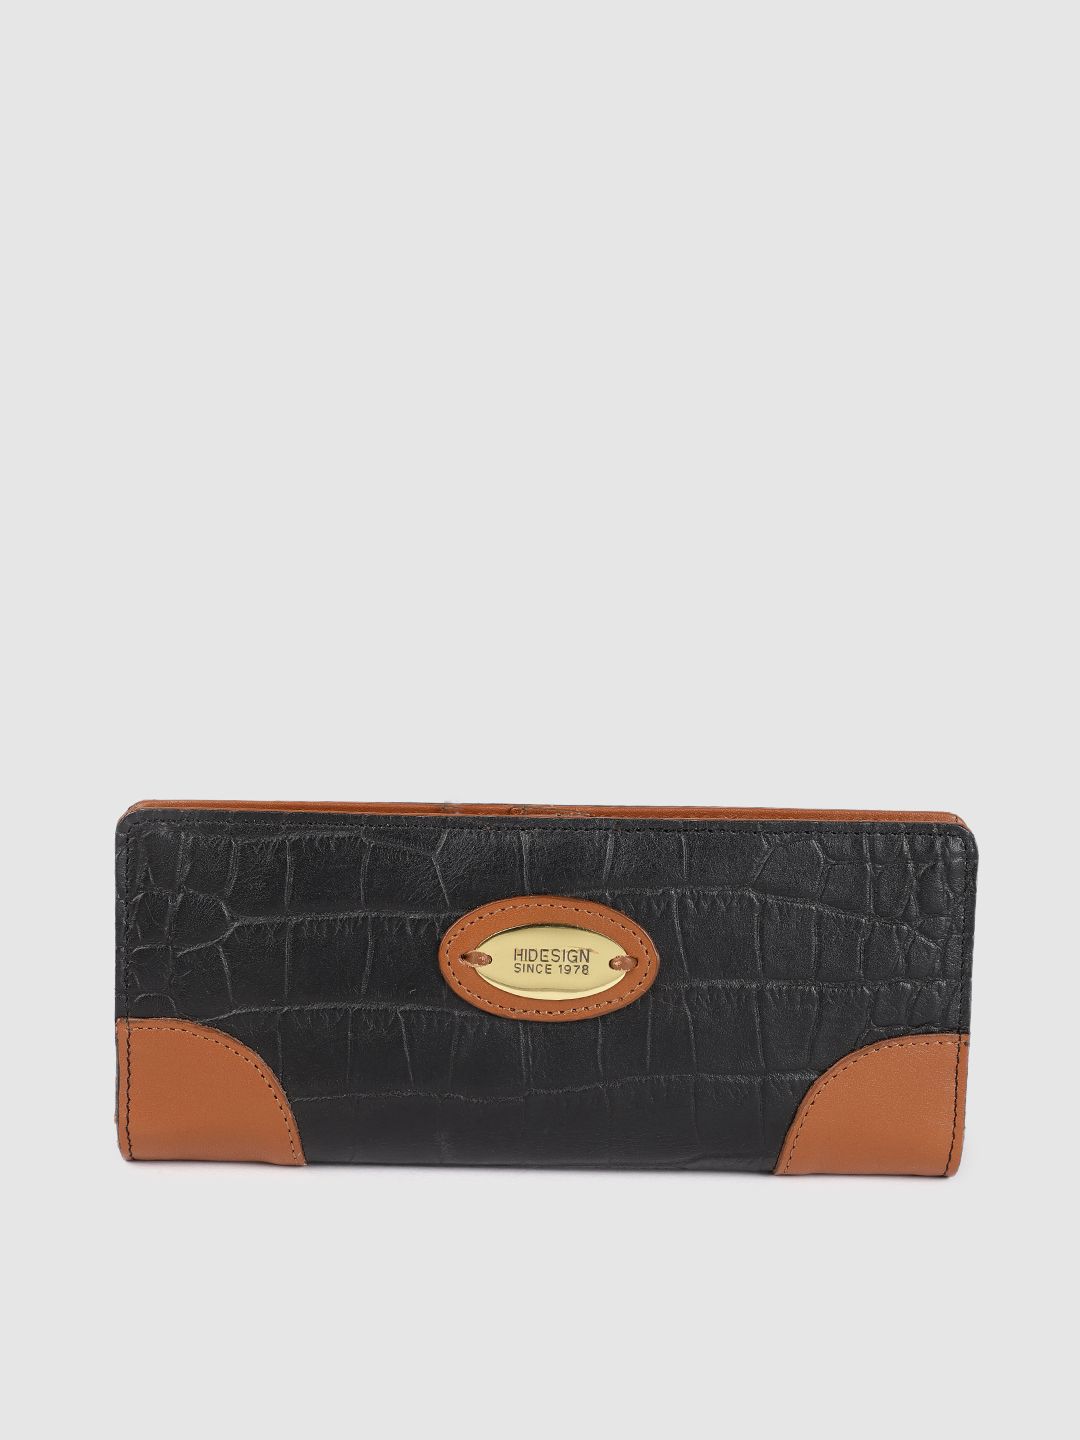 Hidesign Women Black Animal Textured SATURN Leather Two Fold Wallet Price in India